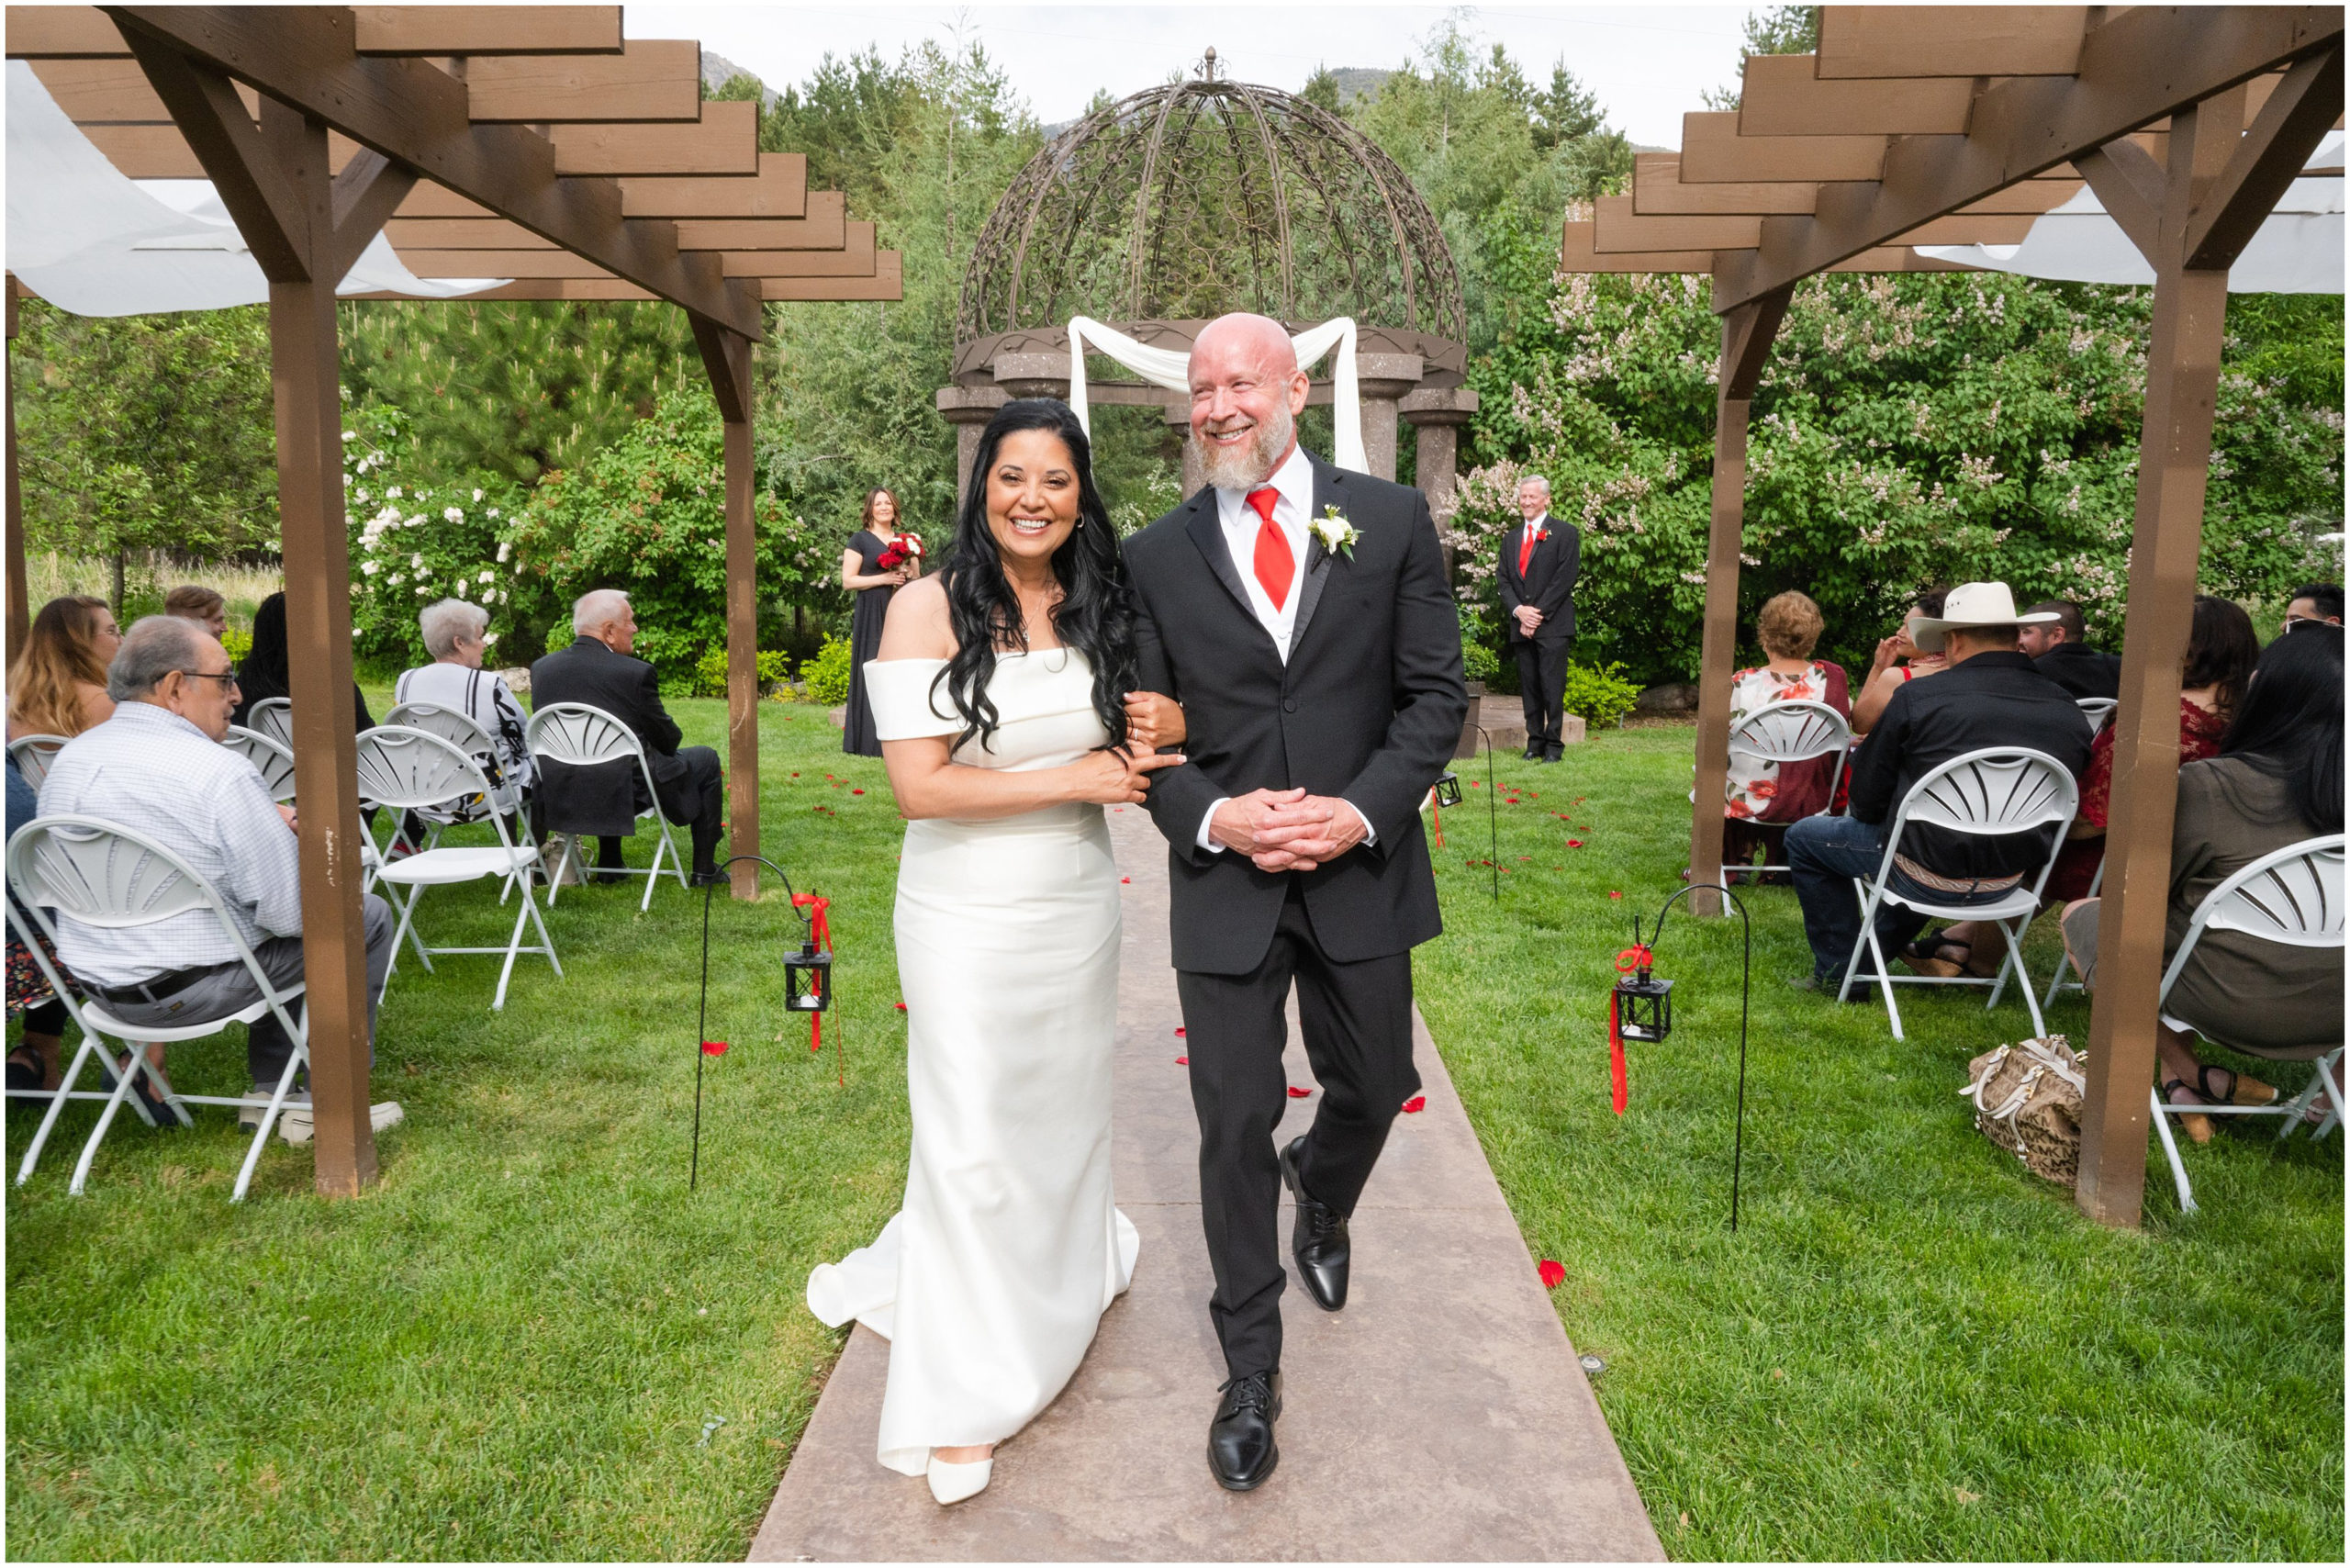 Wedding ceremony with red roses in aisle | Red and Black Oak Hills Utah Spring Wedding | Jessie and Dallin Photography